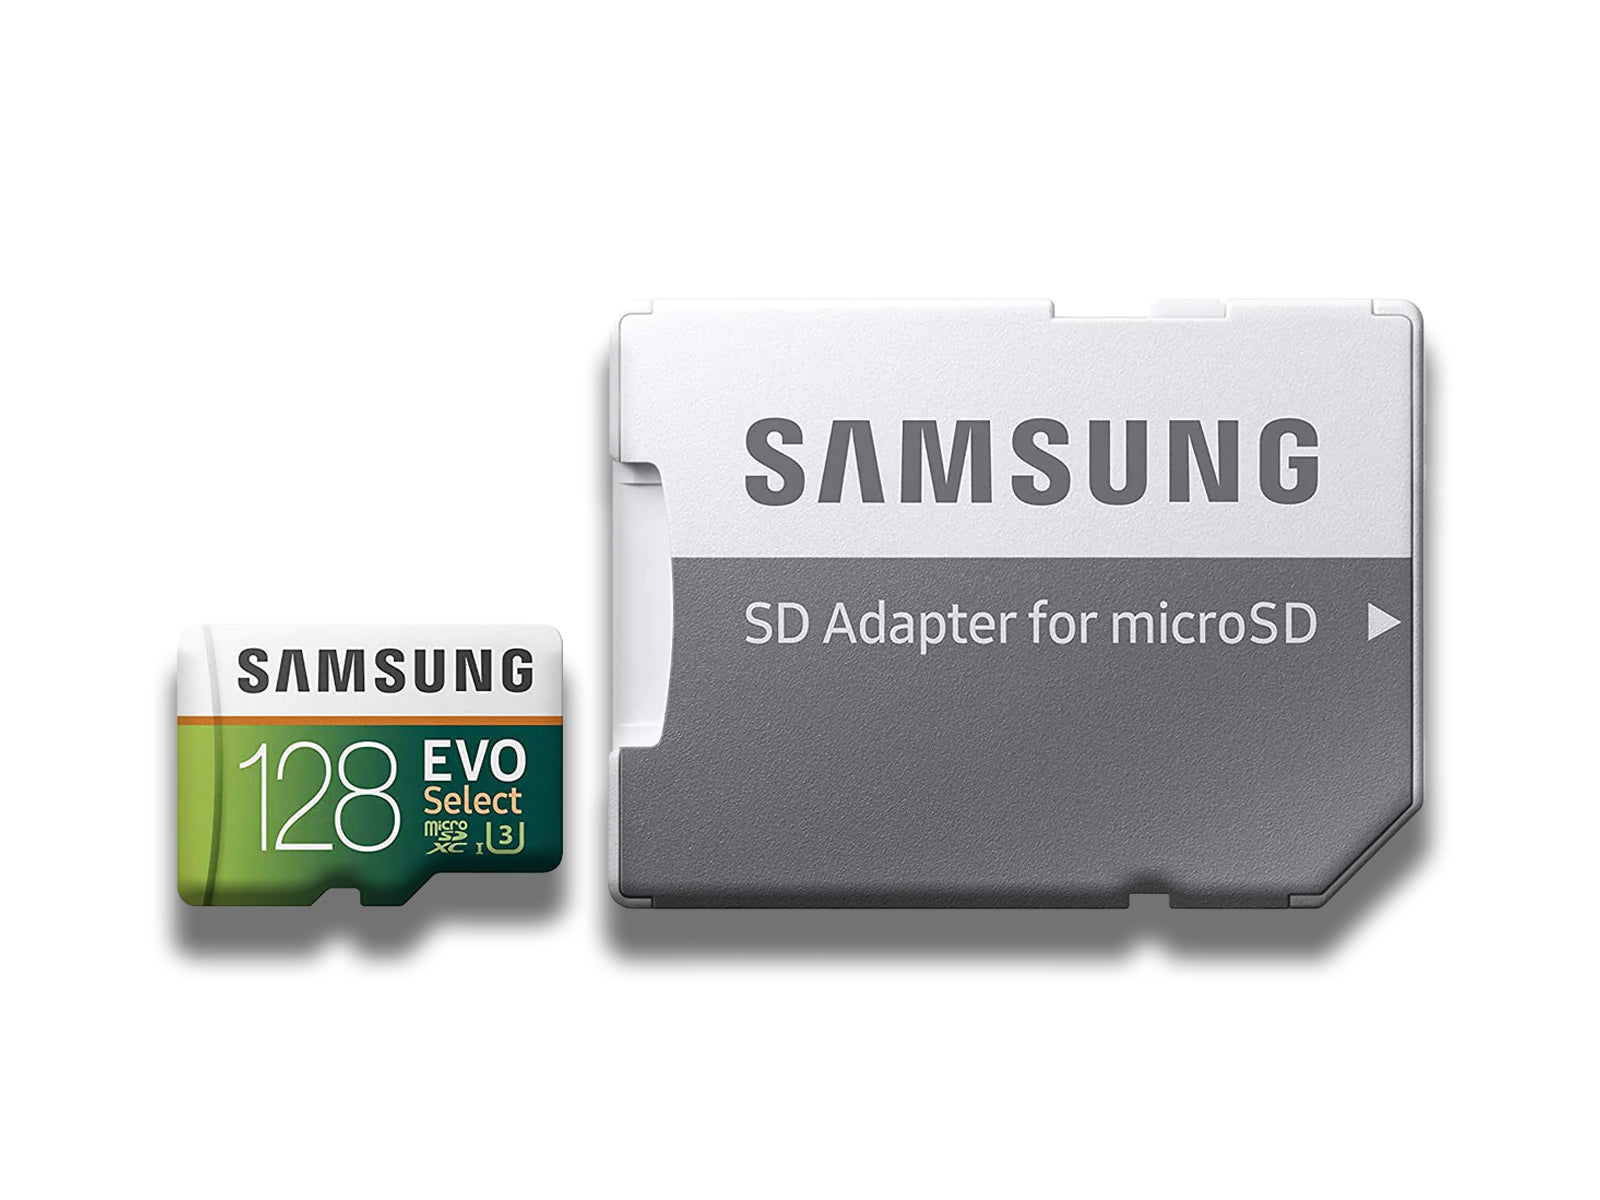 MicroSD 128GB 100MB/s Full HD & 4K UHD Memory Card with SD Adapter | MB-ME128H (Samsung®)